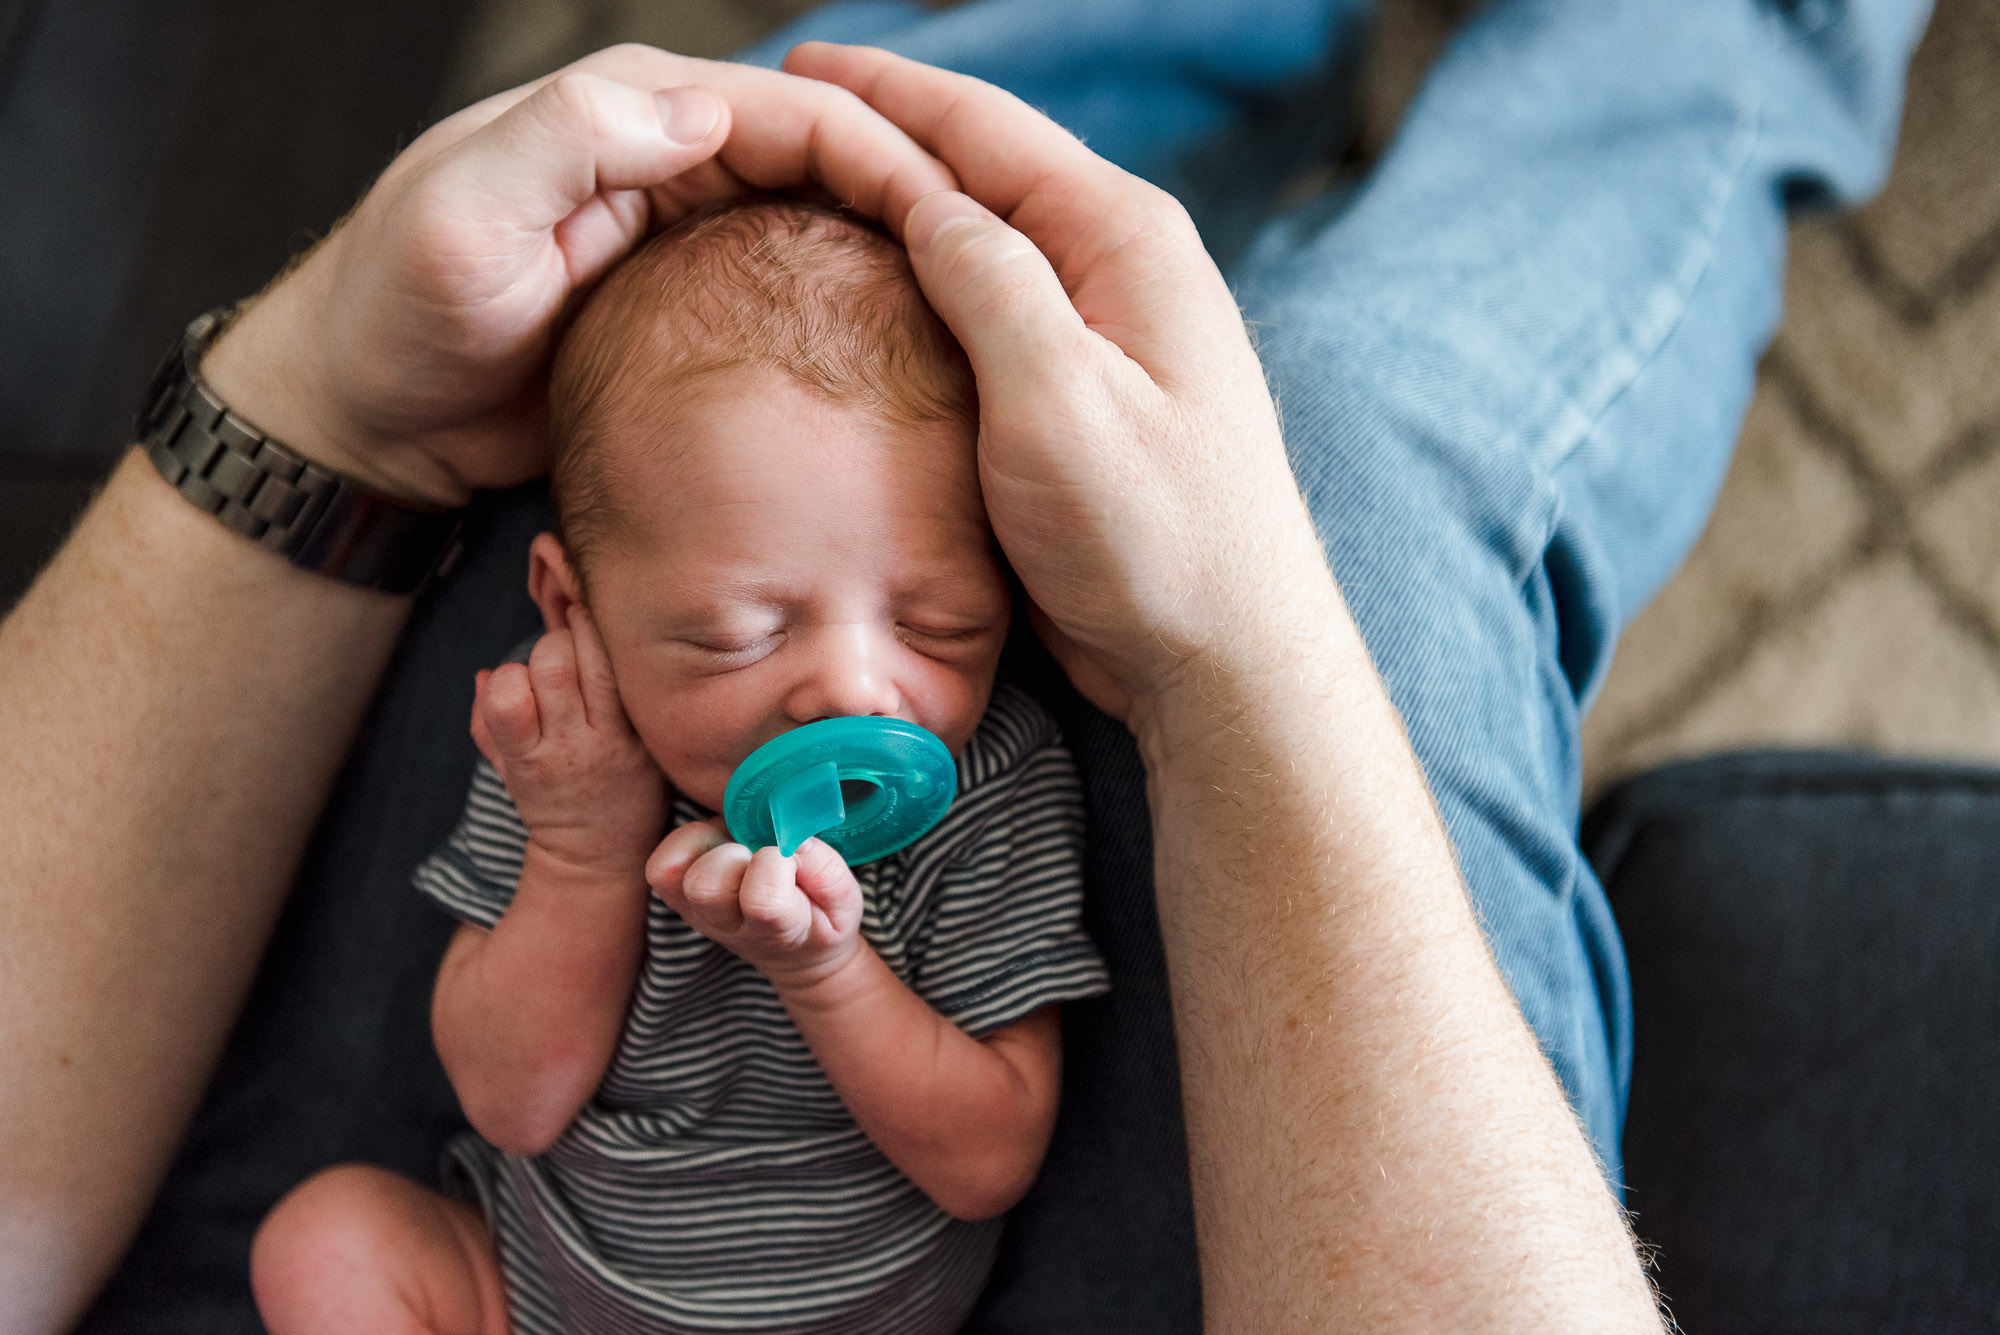 A Dad clasps his son's head tenderly with his hands by Edmonton Photographer Kelly Marleau